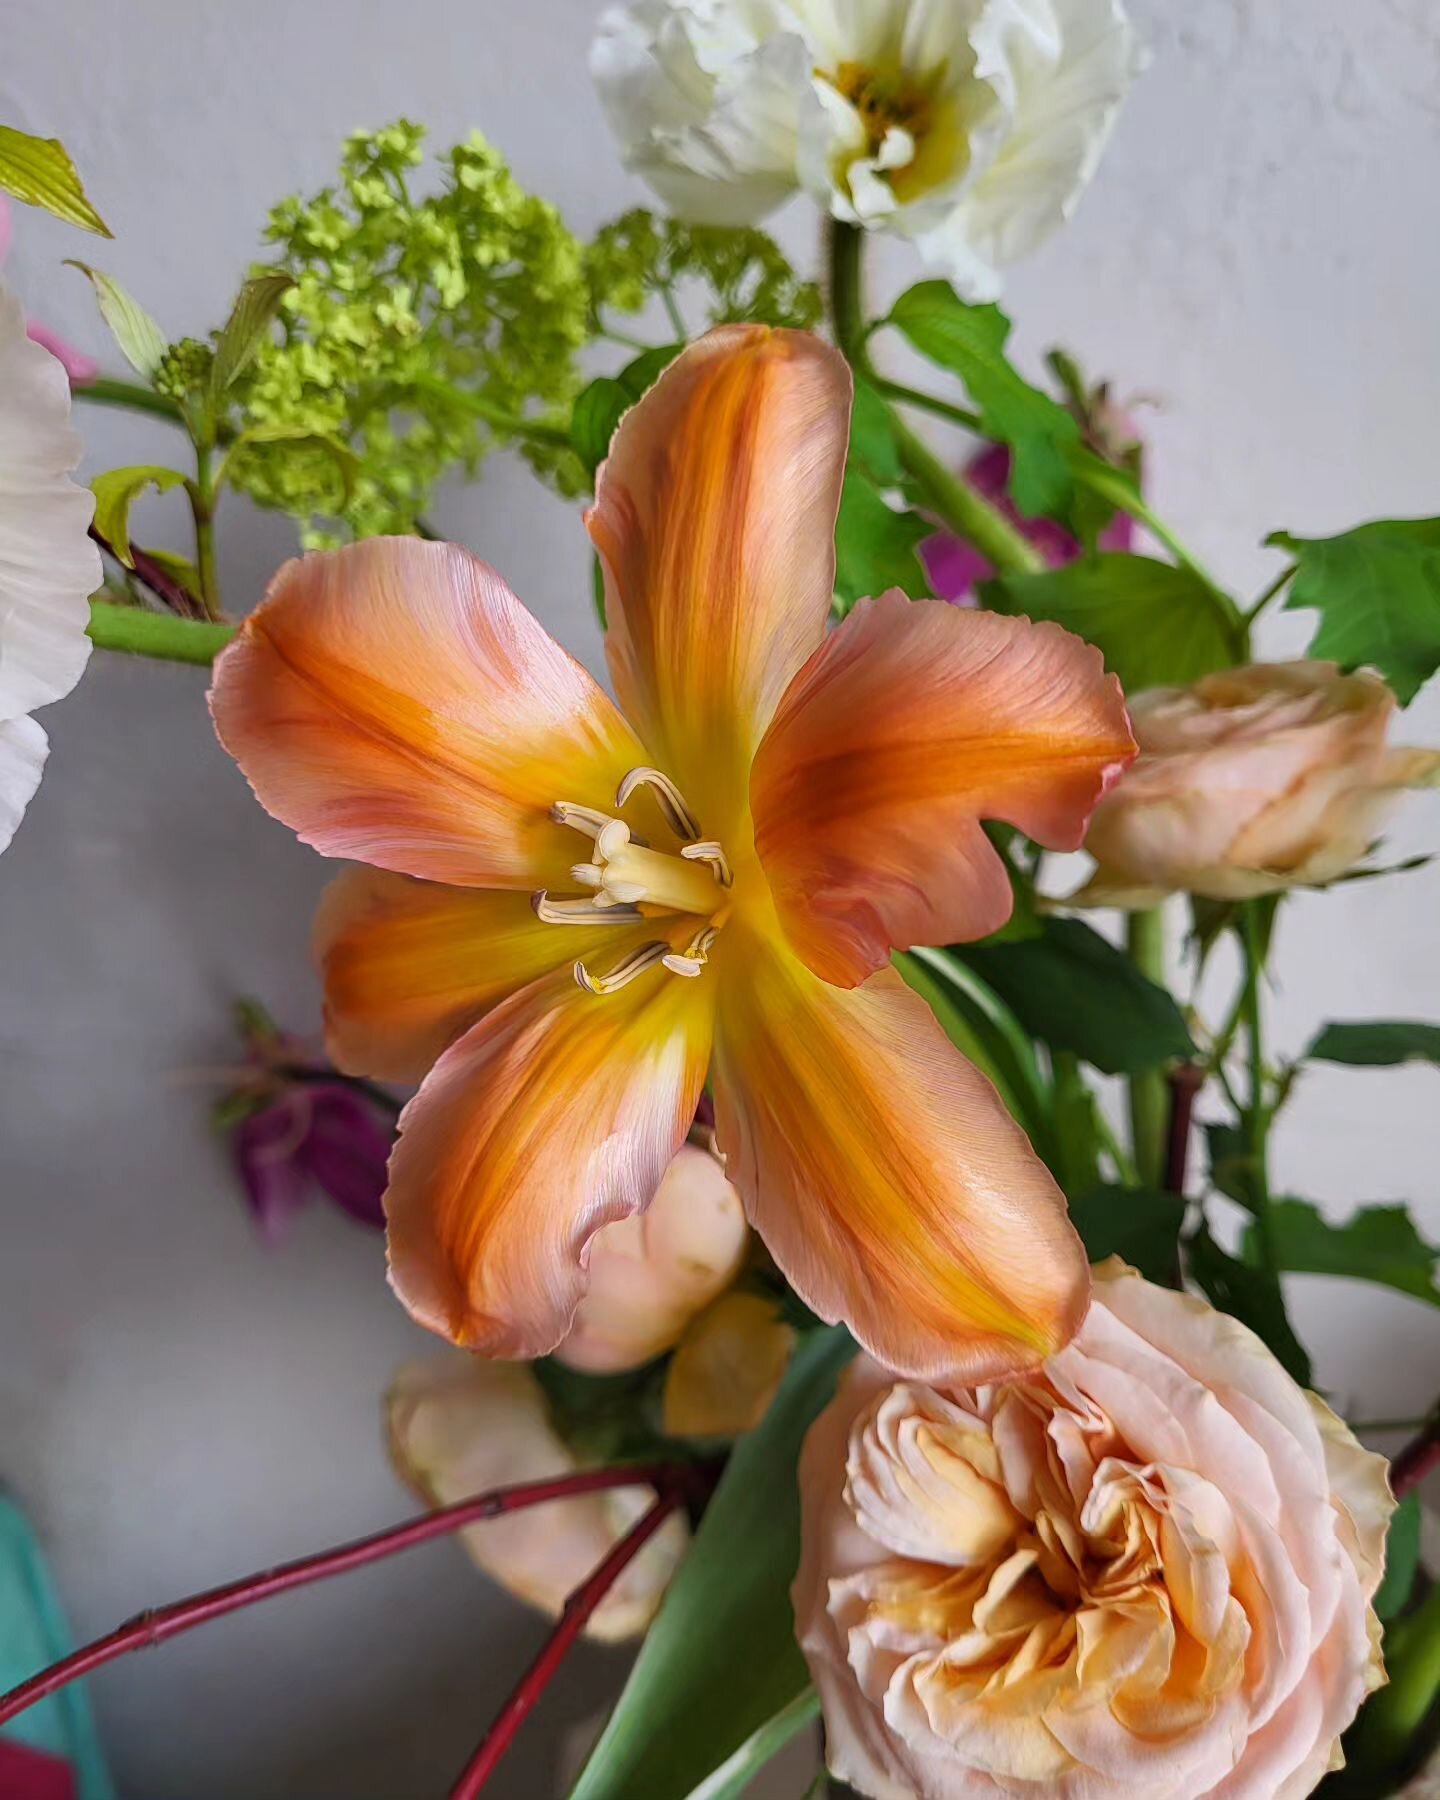 How do we feel about reflexed tulips? Is it a 'yay they're beaut' or a 'dear god are you insane'?
I'm interested to see what you all think.
P. S. There's no right or wrong answer.